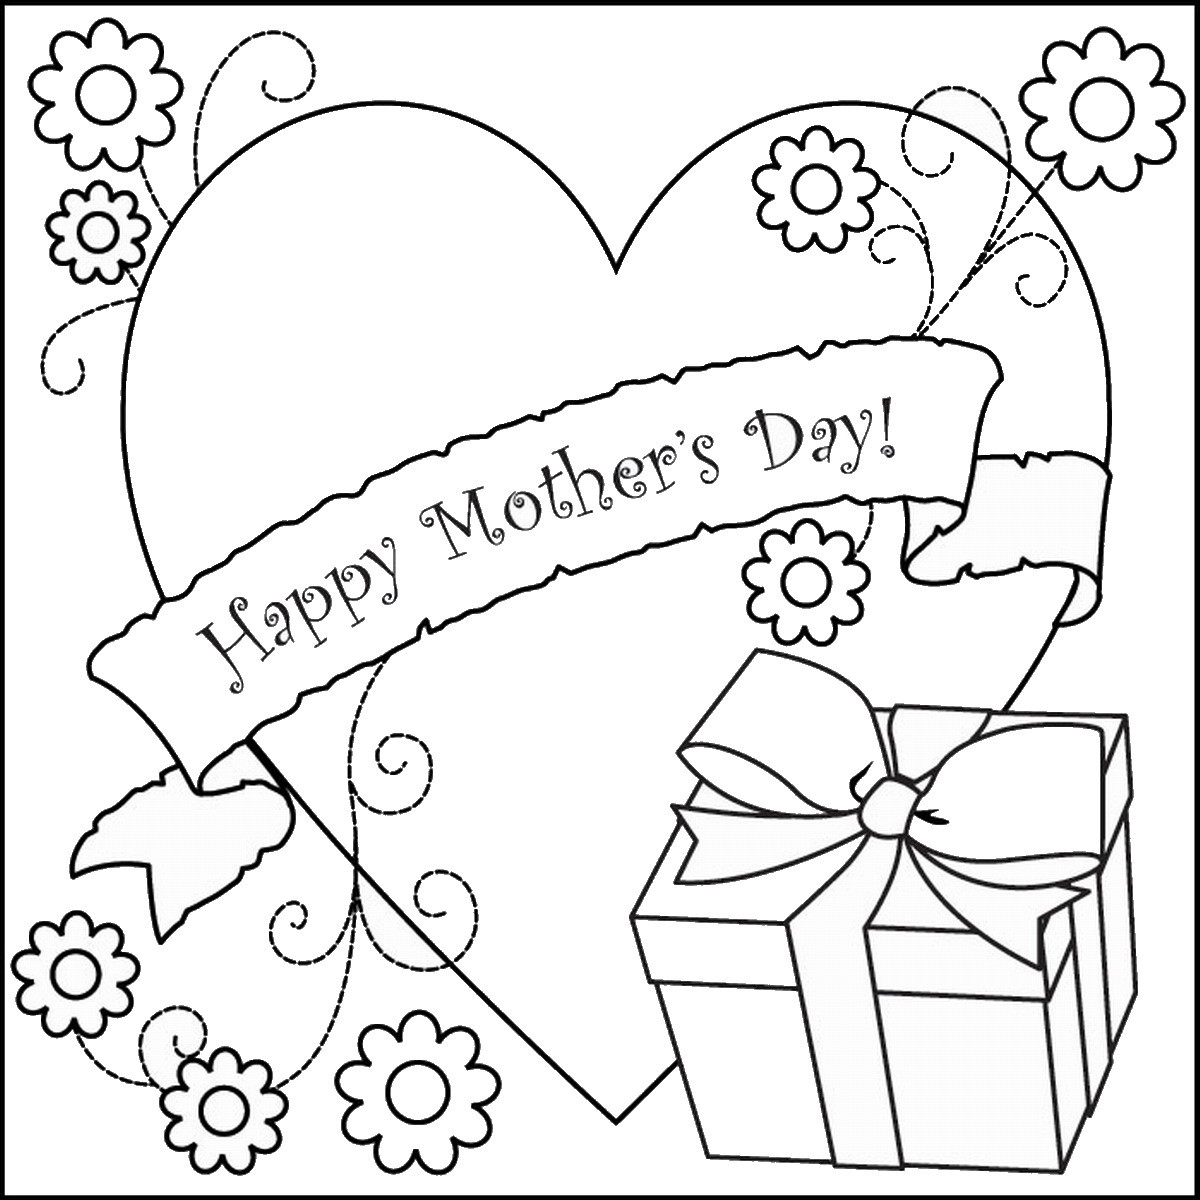 Mothers Day Free Printable Coloring Sheets
 Printable Mothers Day Coloring Pages Cards Christmas Day